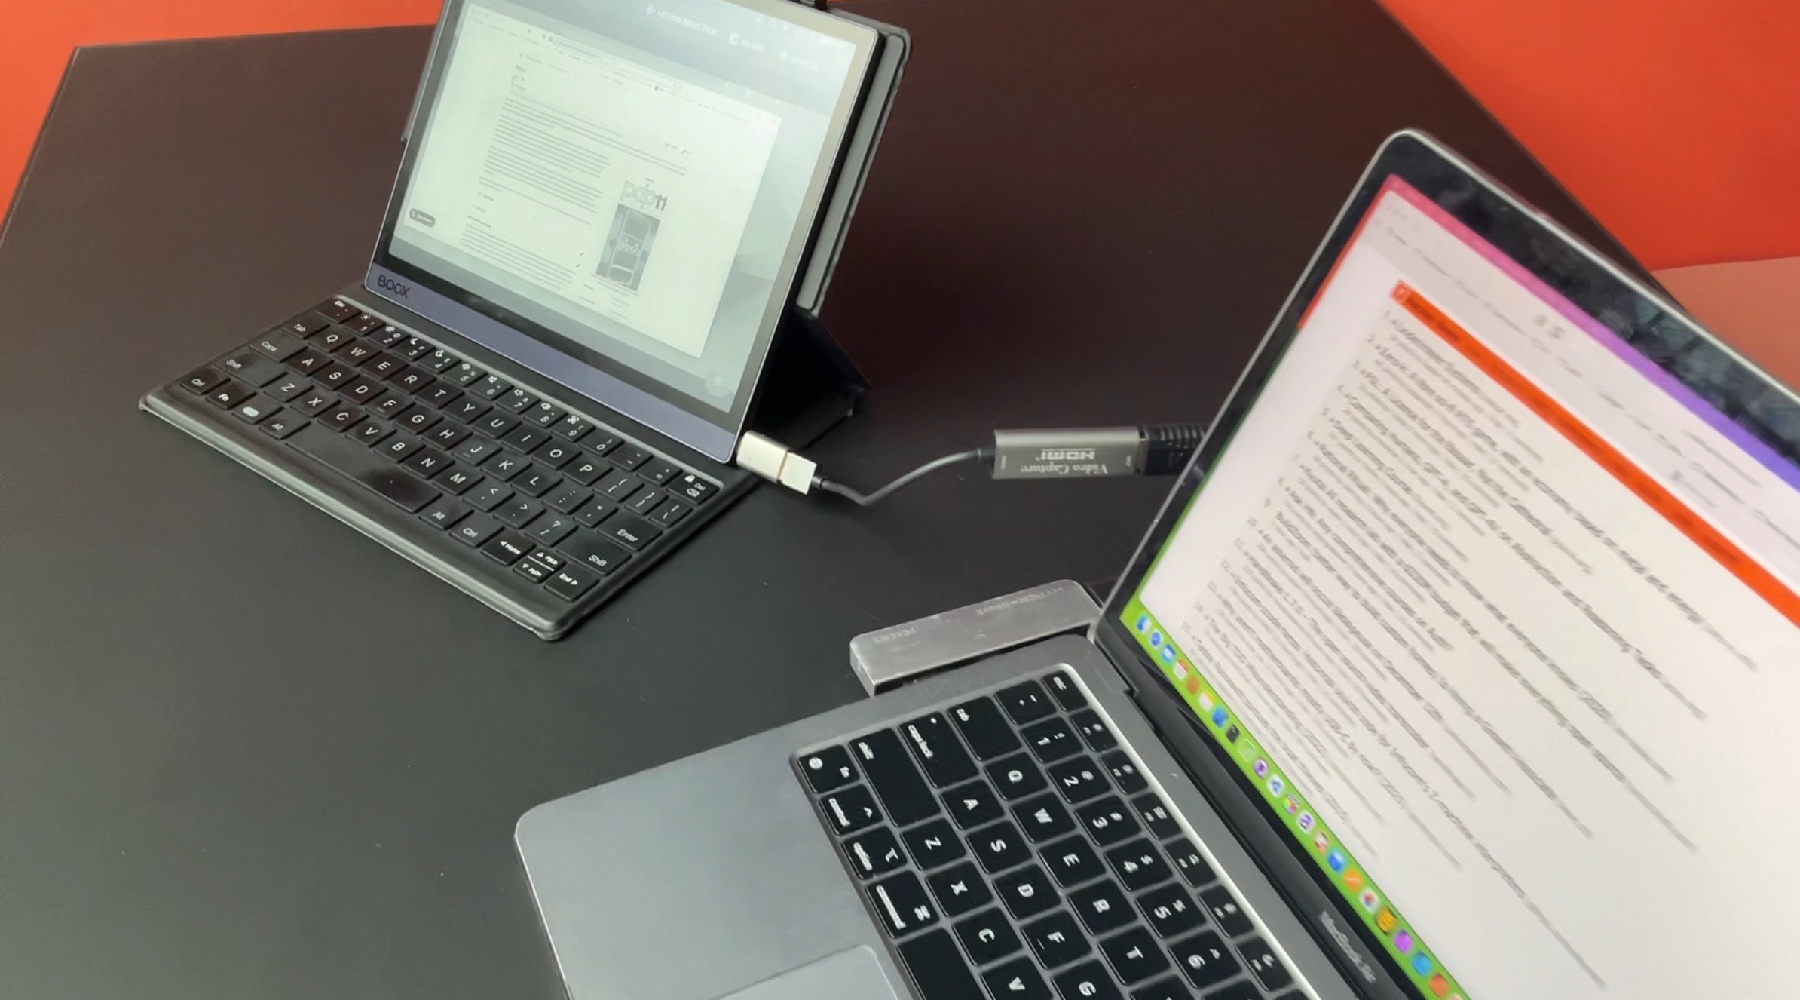 A photo showing an Onyx Boox Tab Ultra connected to a MacBook Air.